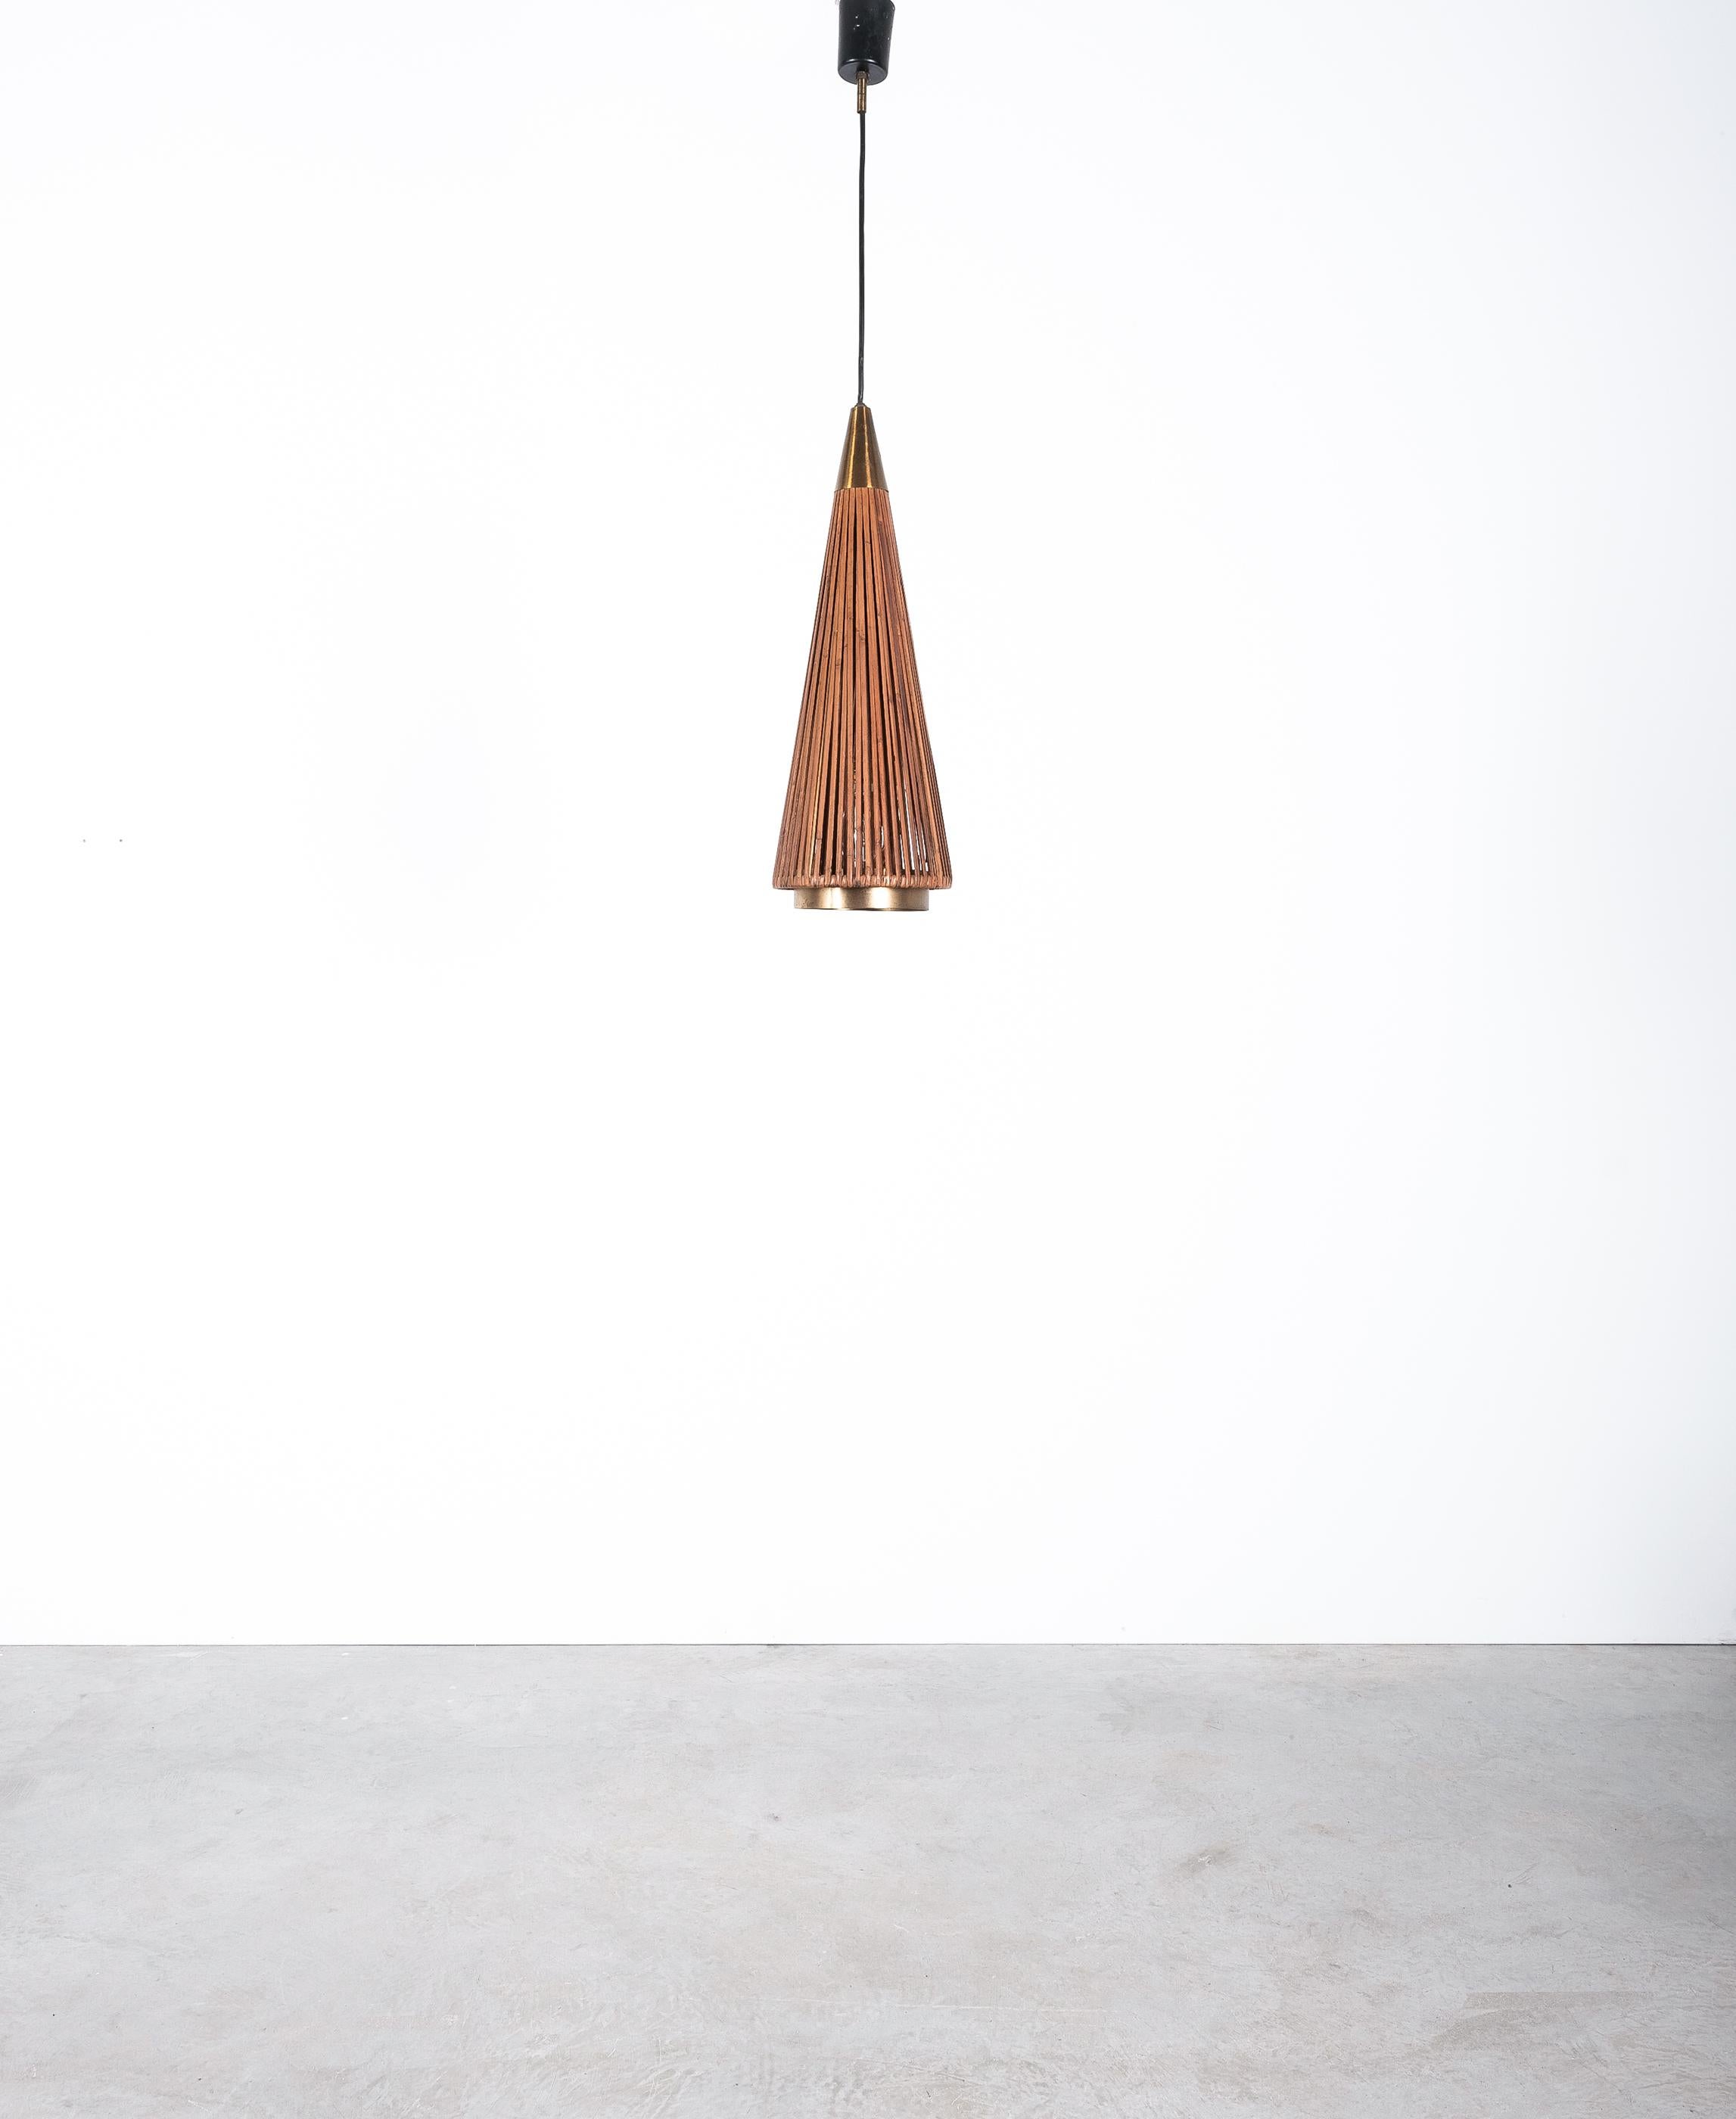 Rattan pendant lamp, Italy, midcentury.

Dimensions: 7.87 (diameter) x 20.1 (height lamp shape only) 59 (overall height)

Rare rattan shade pendant light, circa 1950, Italy, featuring a very long cone shaped rattan shade with a brass cone on top